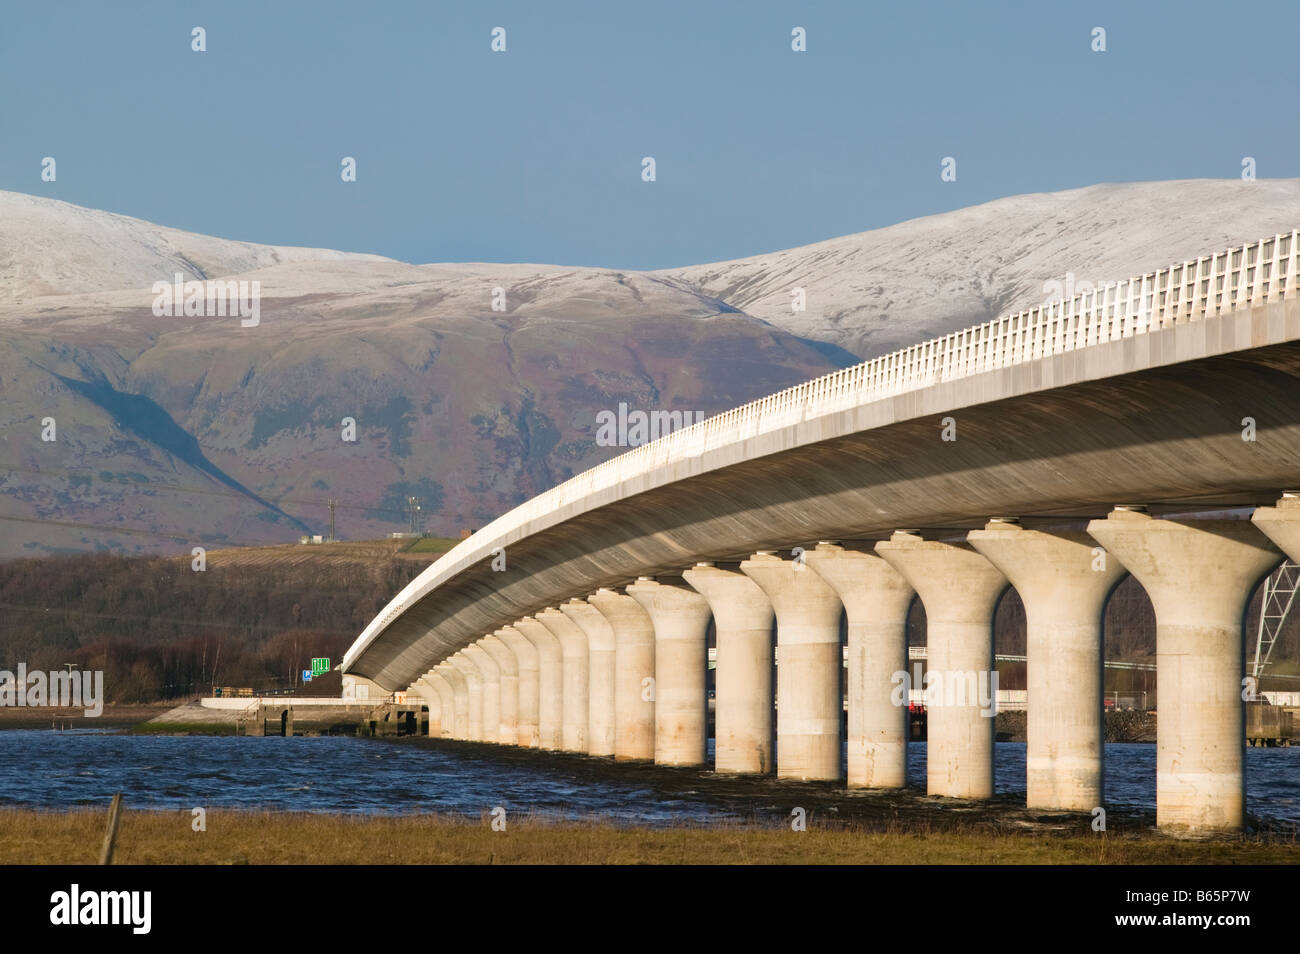 The Clackmannanshire Bridge across the Firth of Forth, Scotland, UK. Stock Photo